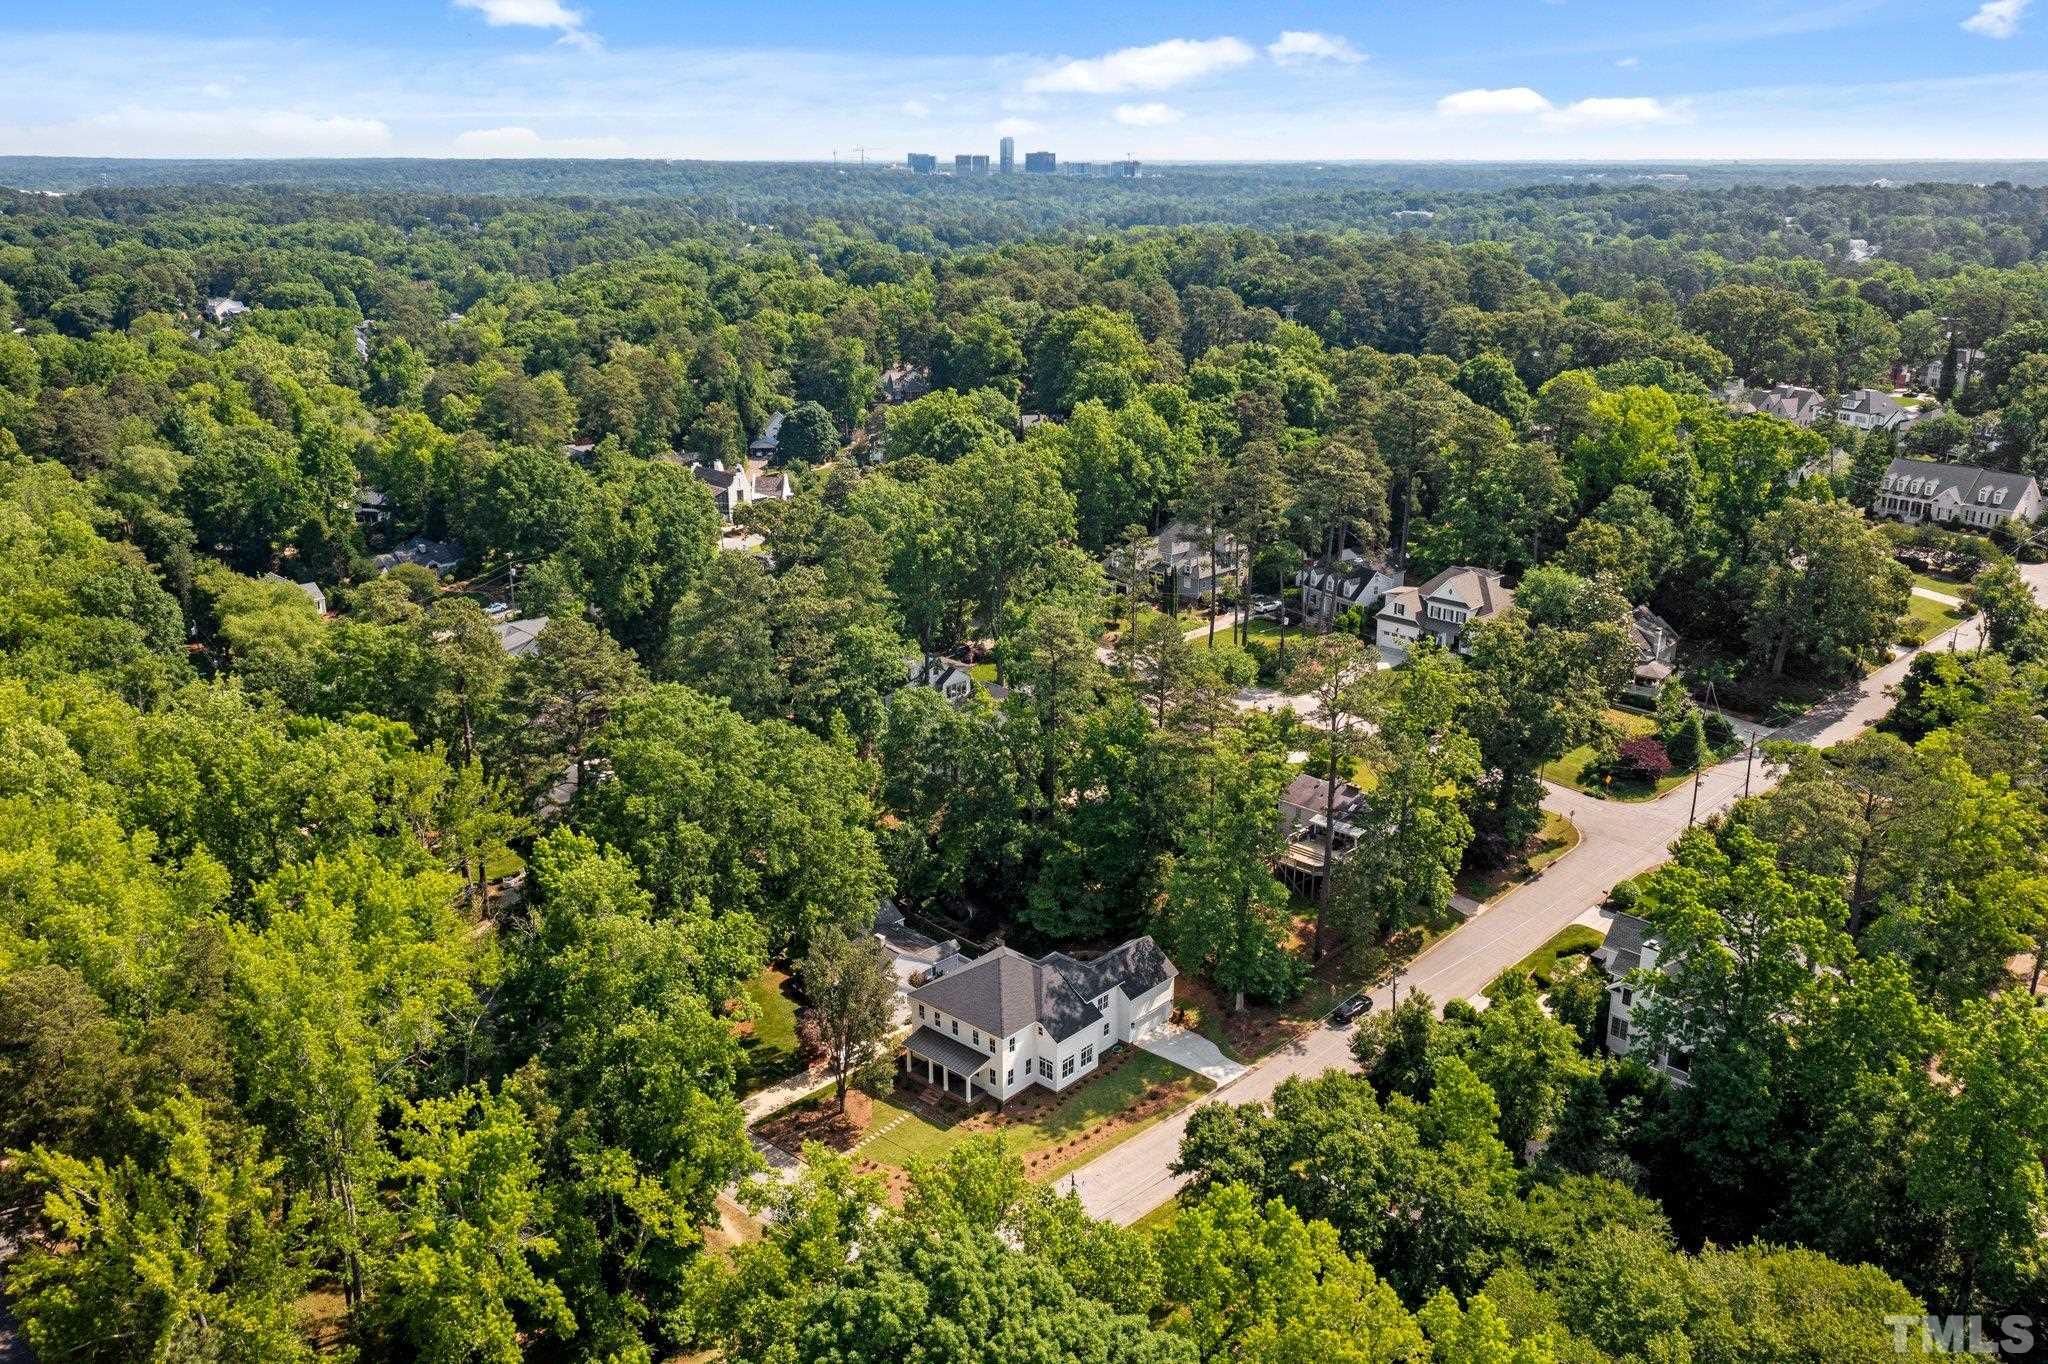 Great location in Sunset Hills, close to everything and minutes to downtown Raleigh.